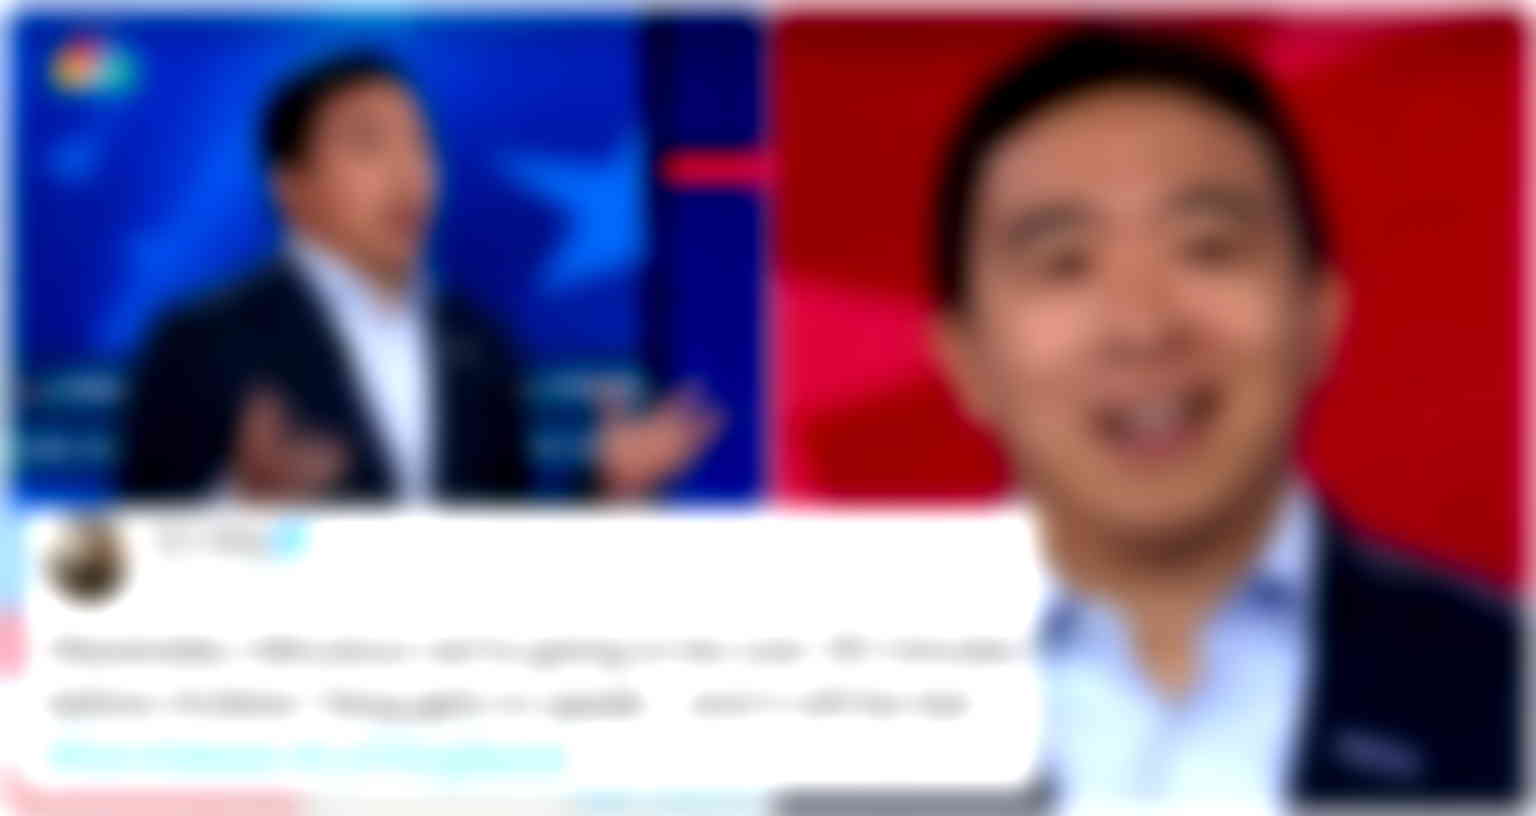 Andrew Yang Gets Completely Ignored for the First 32 Minutes of the Democratic Debates